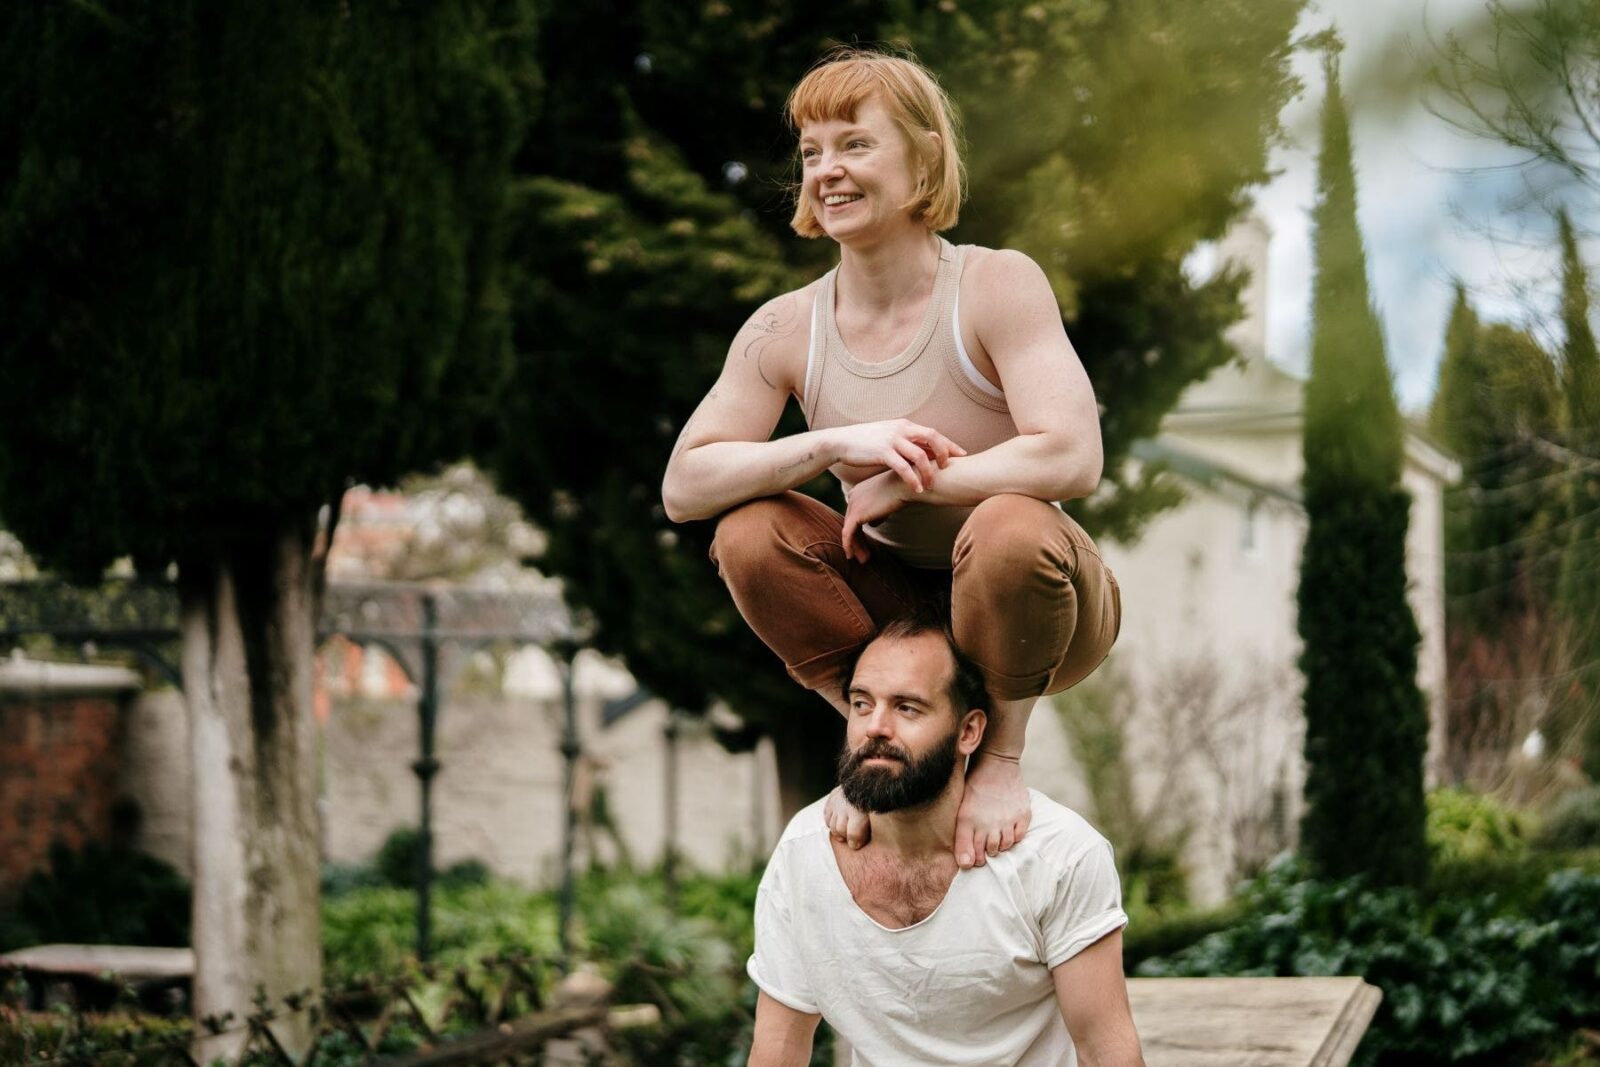 A man and a woman doing acrobatics outside. The woman is crouching on the man's shoulders.